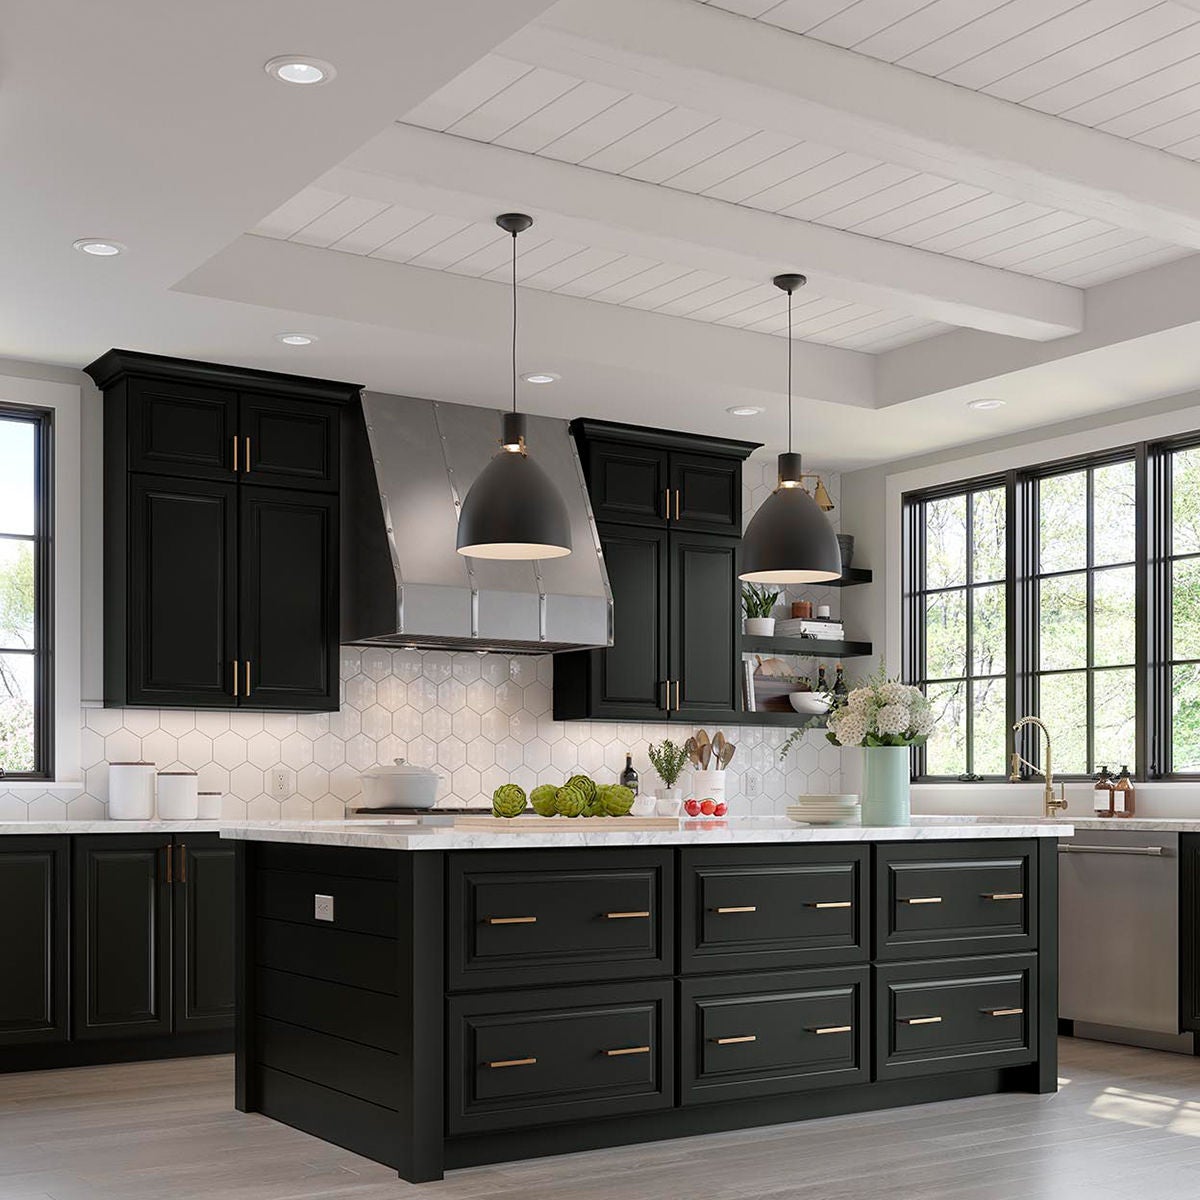 Captivatingly Bold and Charming Painted Black Cabinets